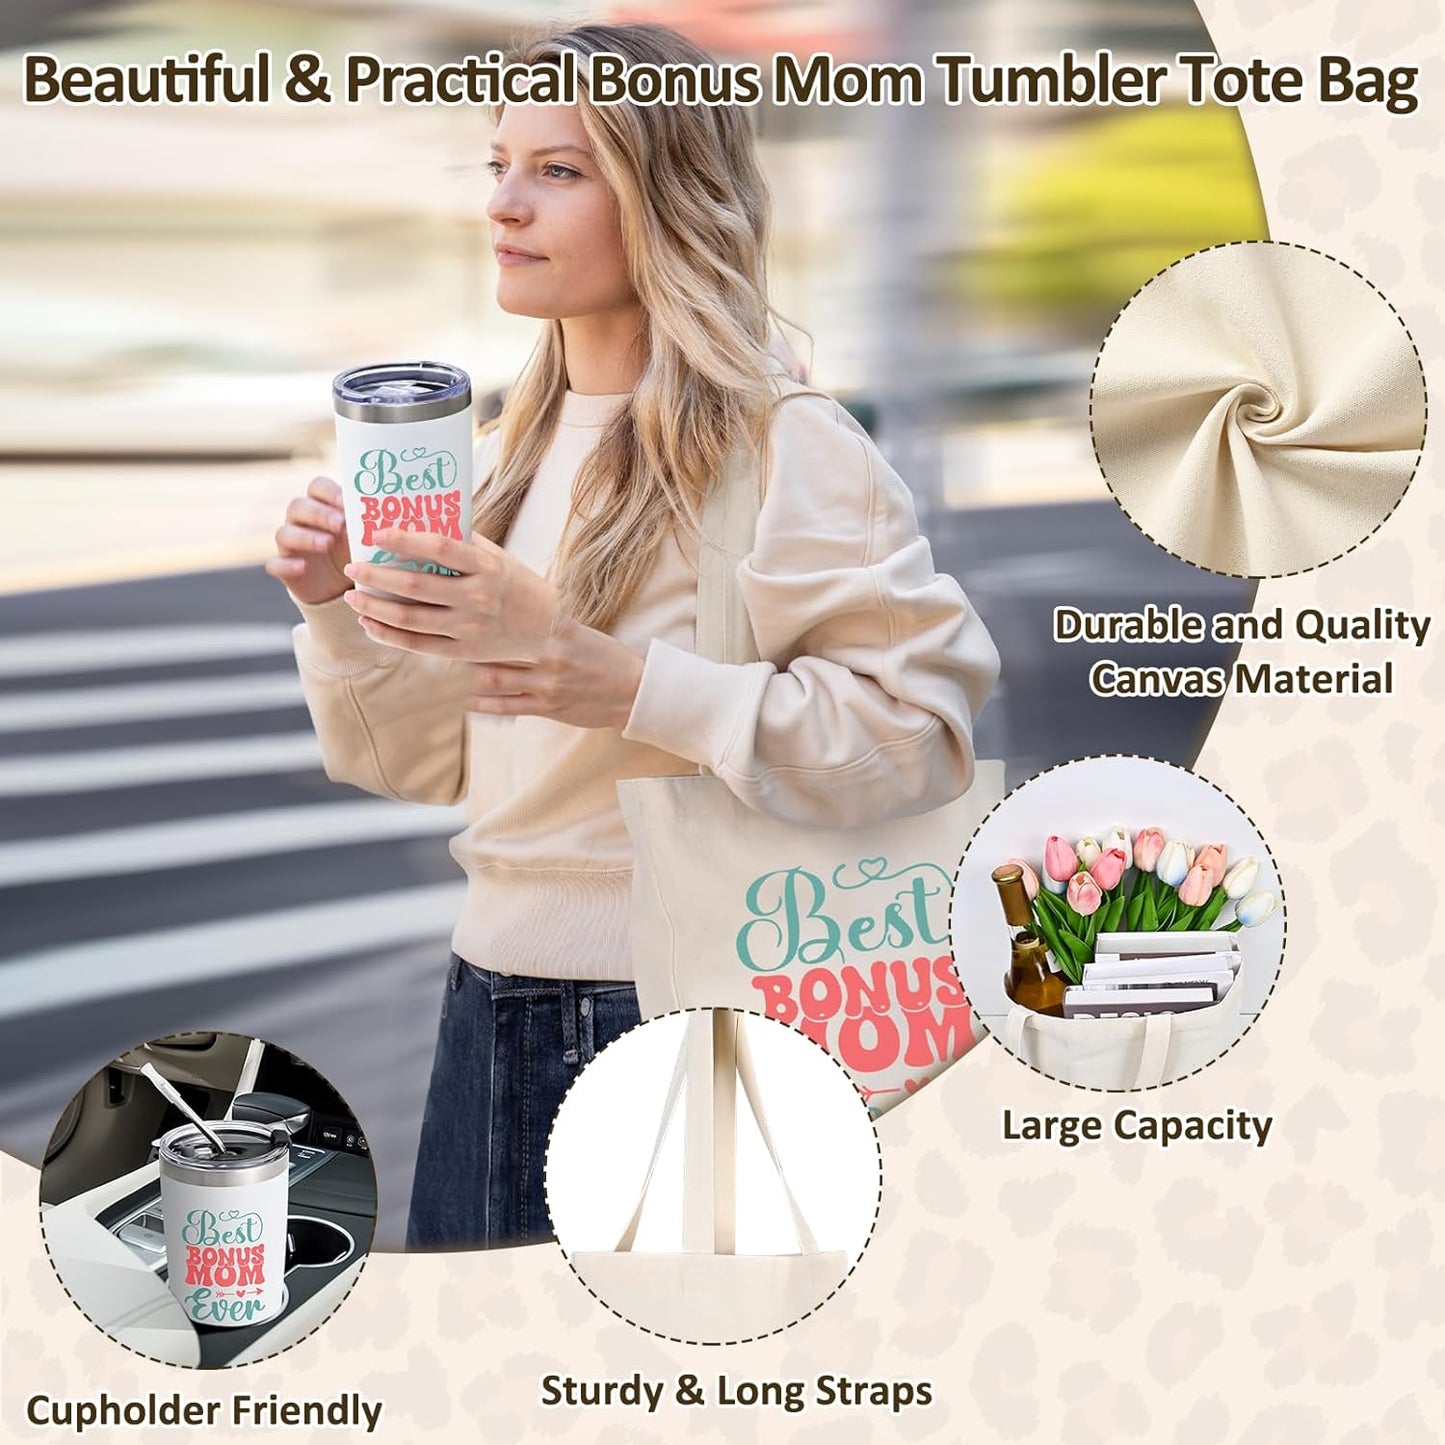 Bonus Mom Mothers Day Gifts Set- Best Bonus Mom Ever Tumbler & Tote Bag, Step Mom Mother's Day Gifts from Daughter Son Kids, Unique Stepmom Gift 20 Oz Cup